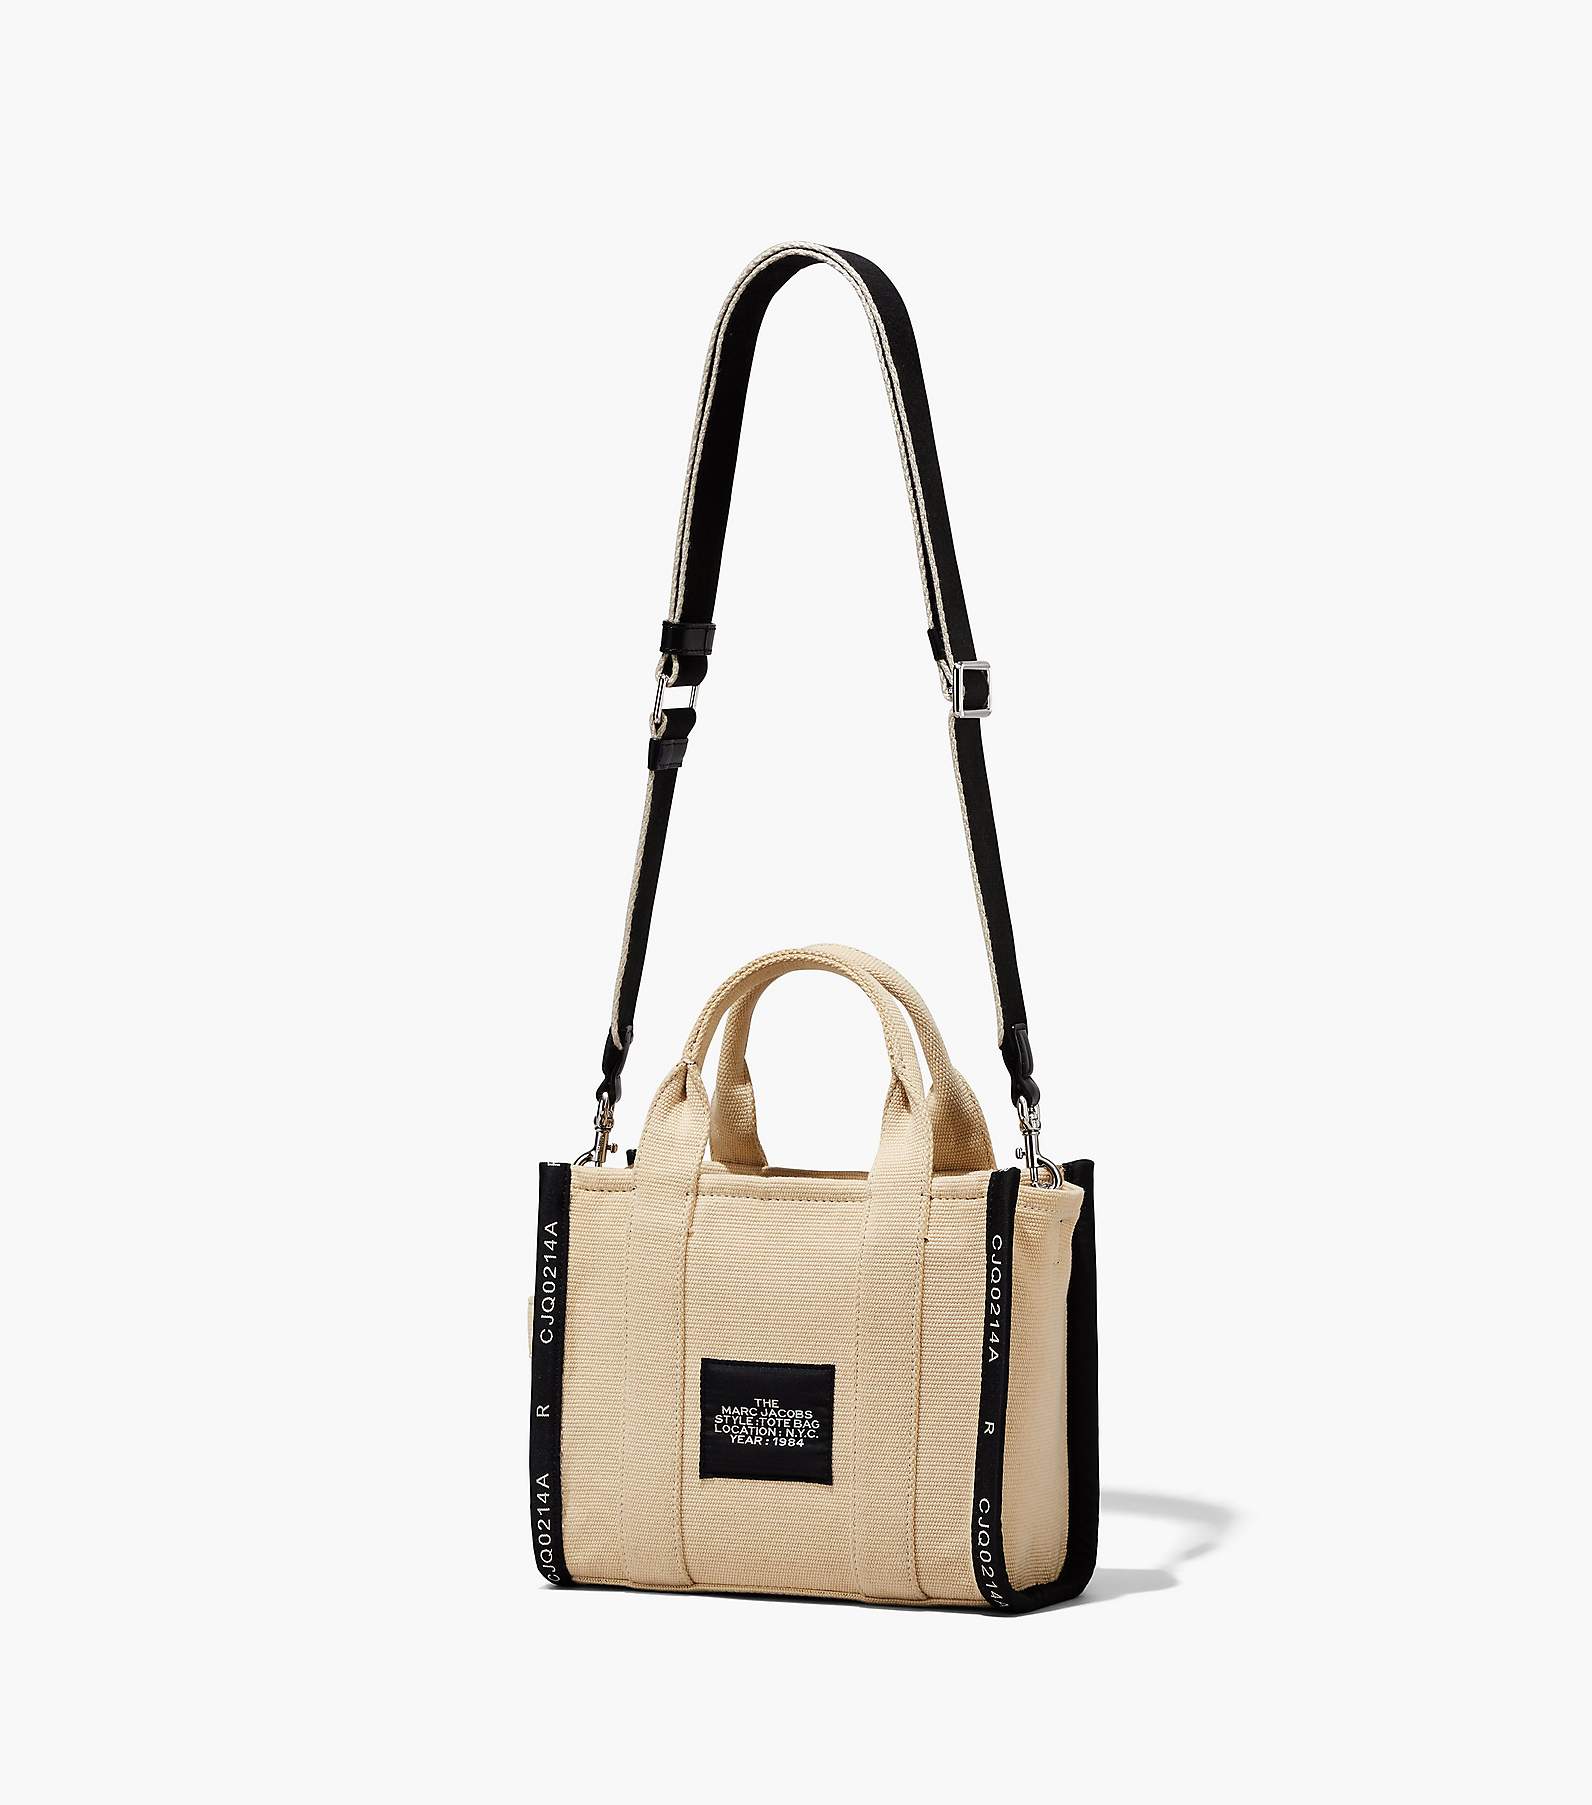 Marc Jacobs Brown 'The Small Leather Tote Bag' Tote